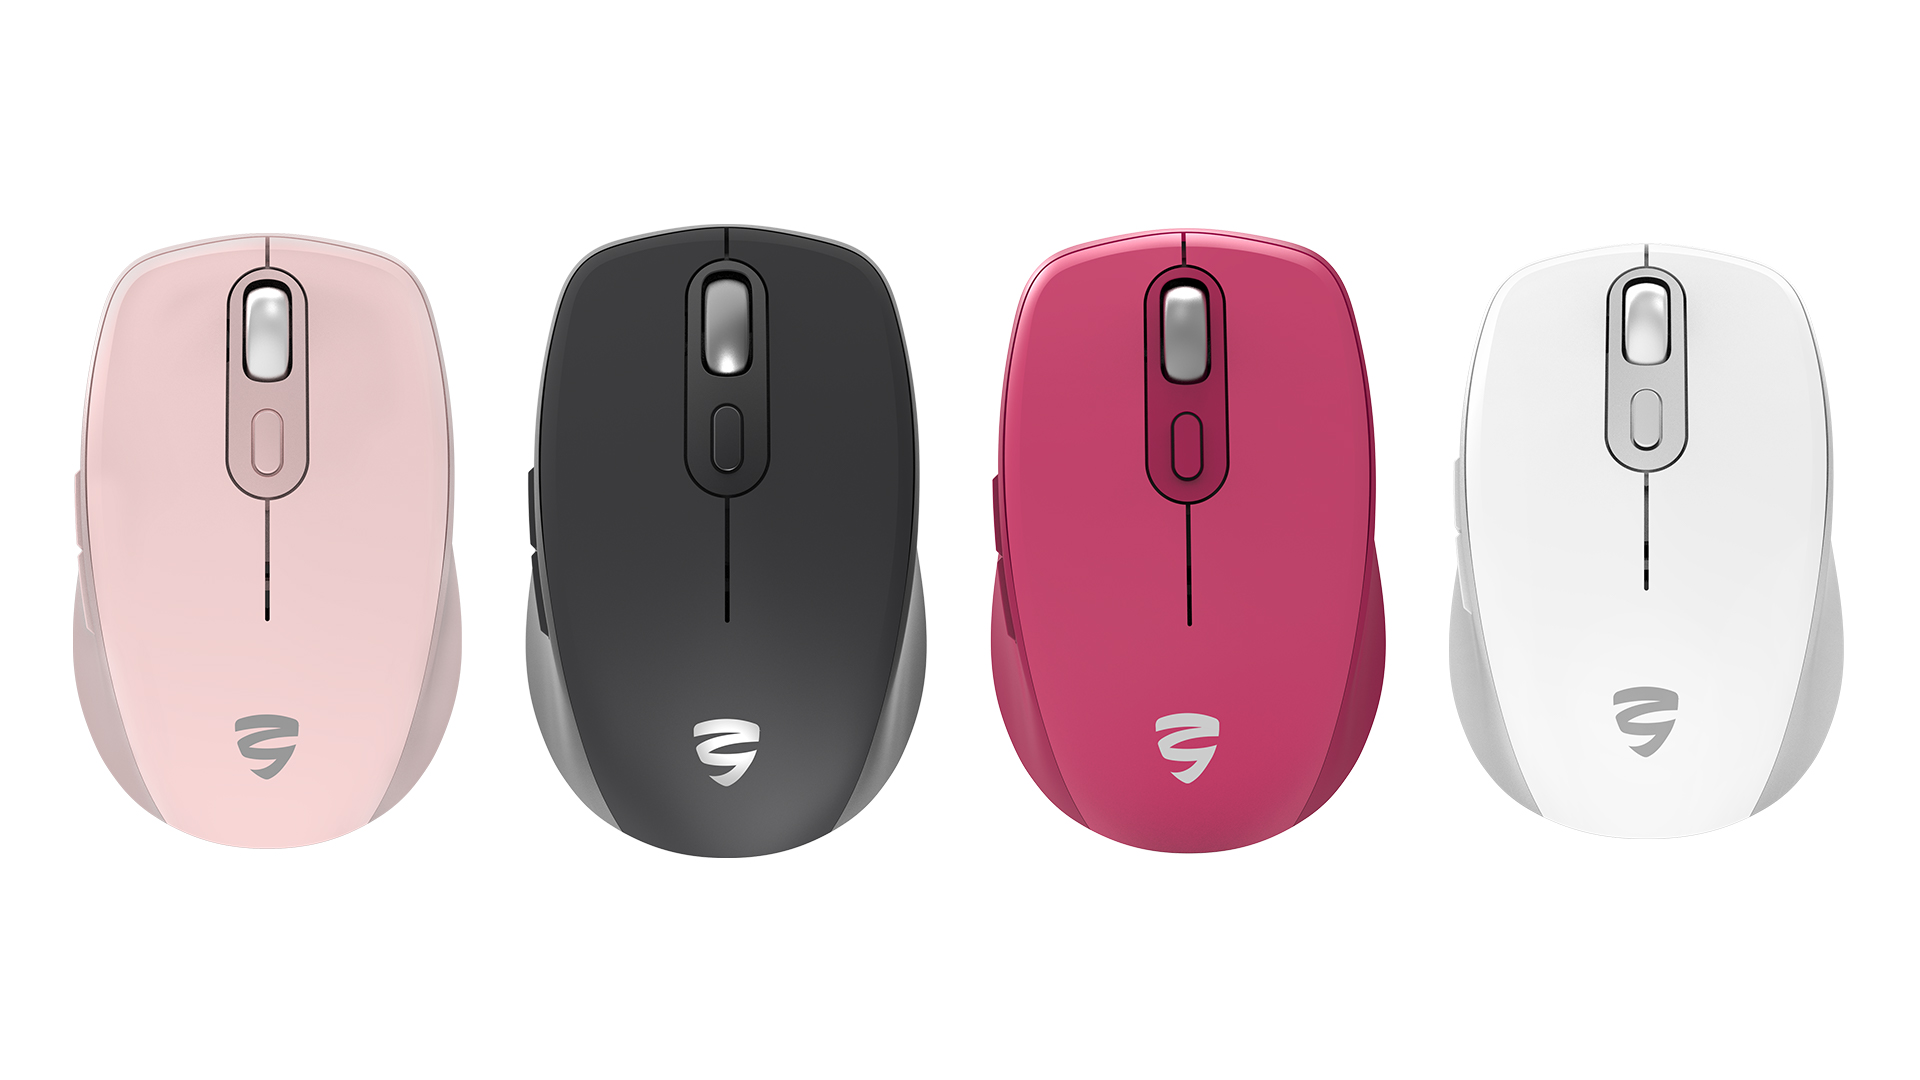 Keyceo Last 2.4g+BT mouse recomment 2